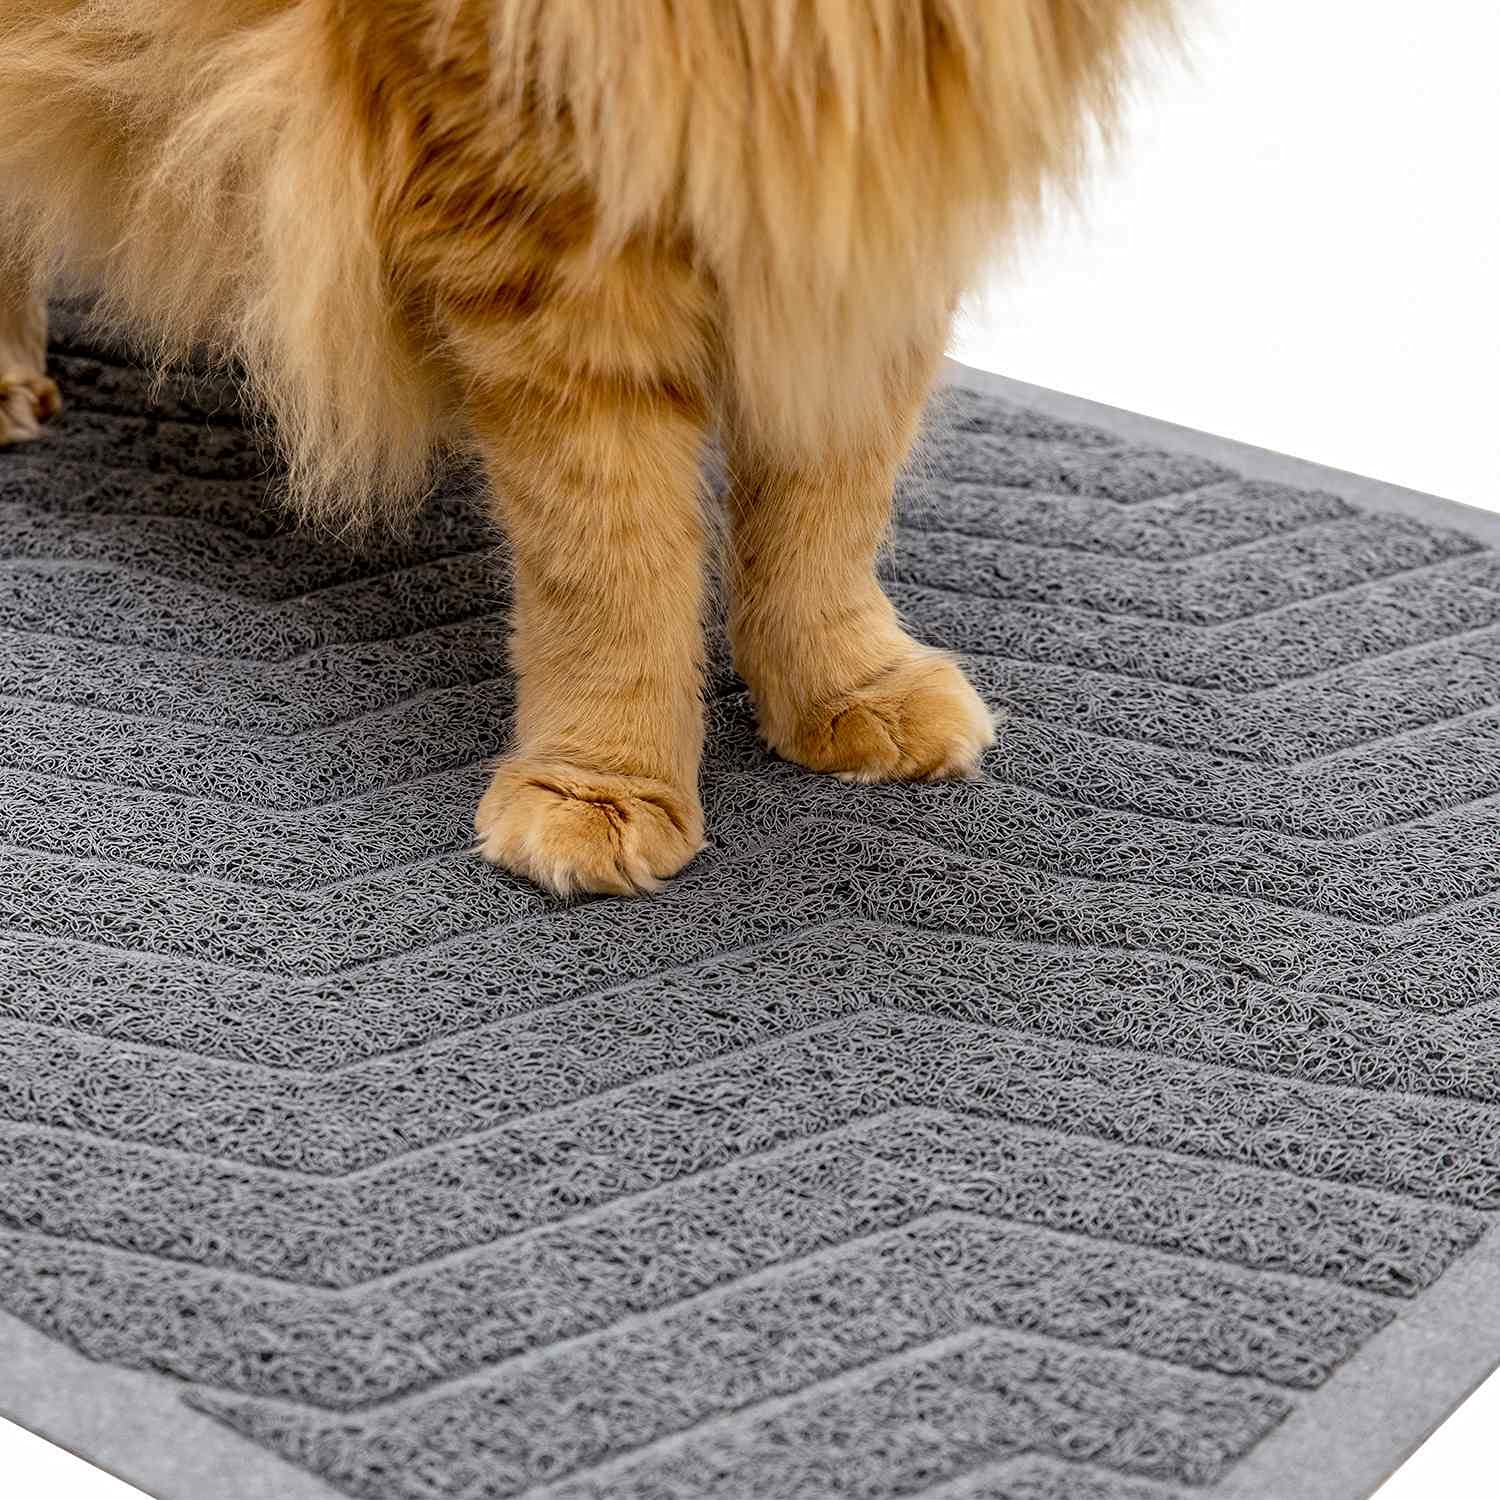 Book Cover WePet Cat Litter Box Mat, Kitty Premium PVC Pad, Durable Trapping Rug, Phthalate Free, Urine-Resistant, Scatter Control, L 35 x 23, Grey 35x23 Inch (Pack of 1) #02 Grey